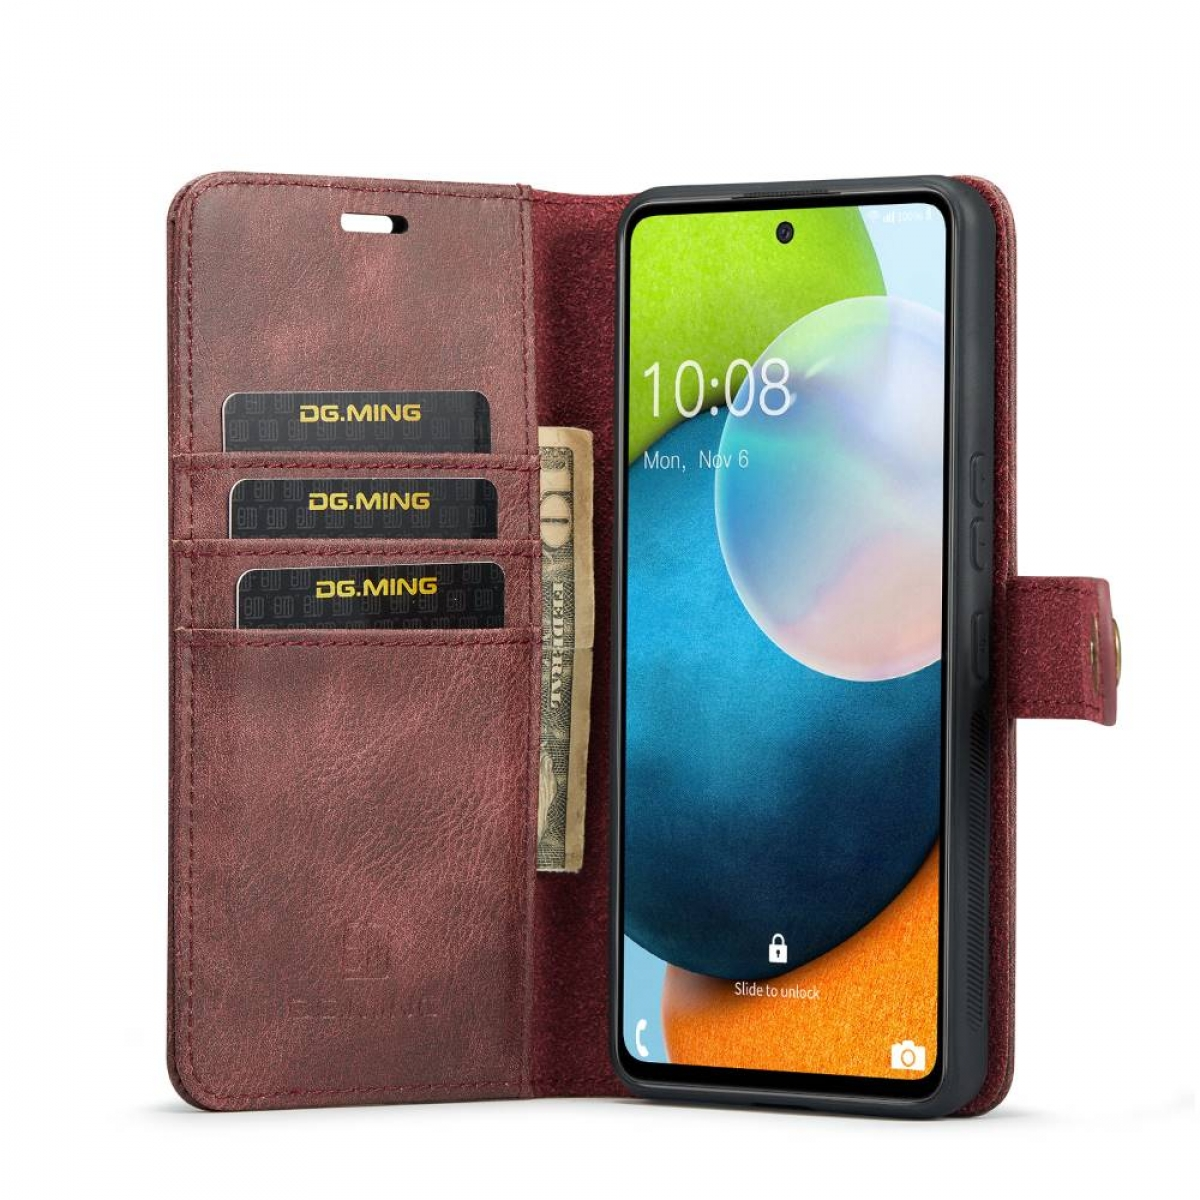 Bookcover, A53 Galaxy DG 5G, 2in1, MING Samsung, Rot